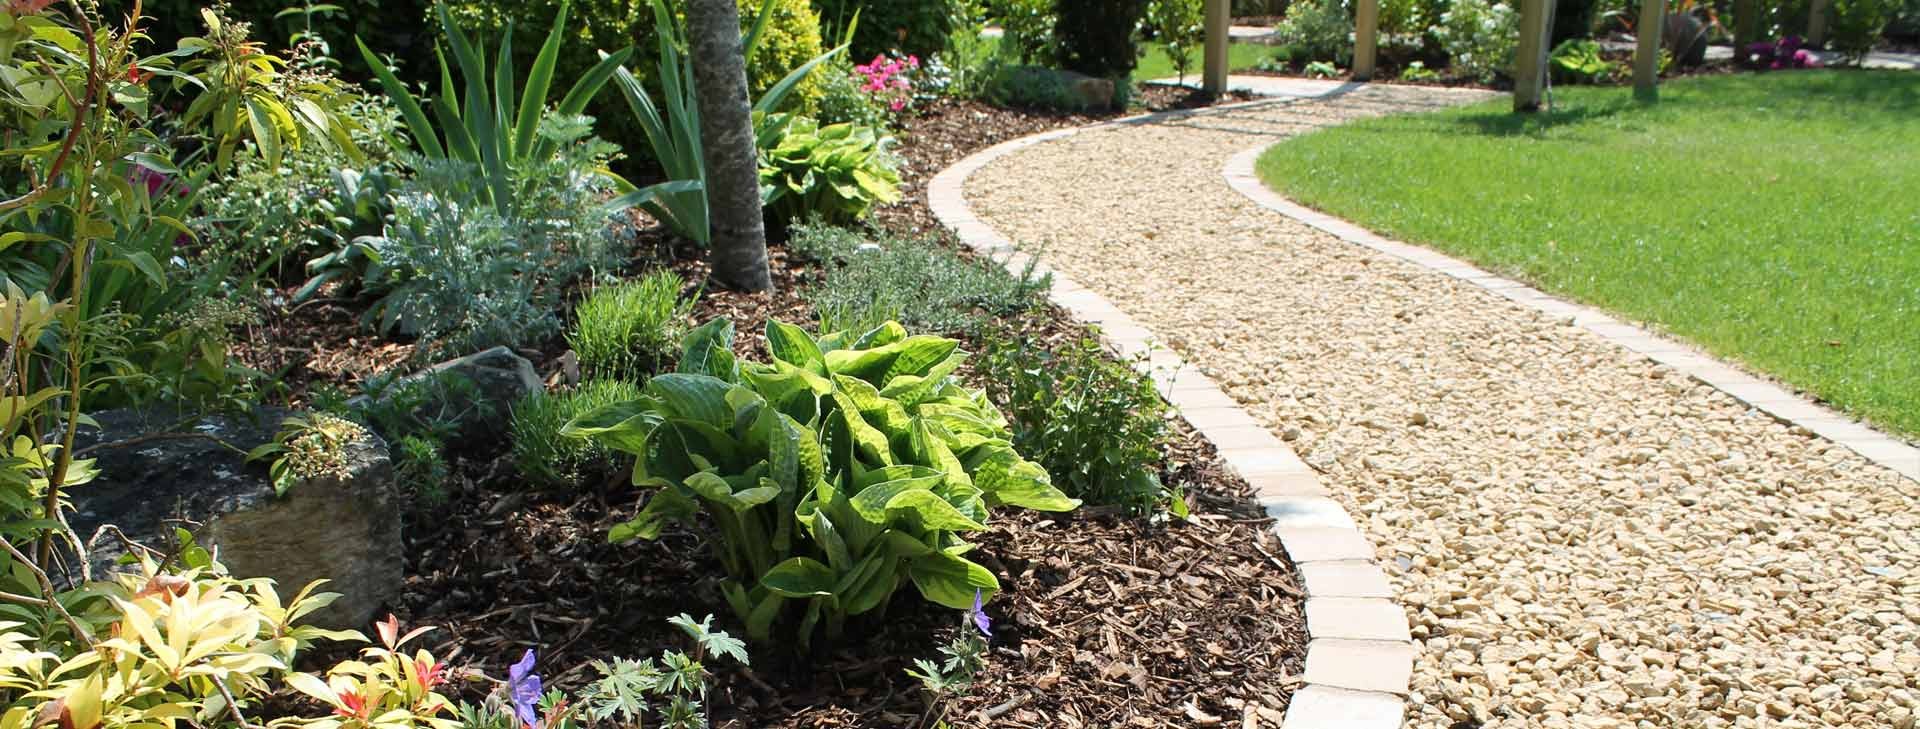 We offer a variety of landscaping services to meet your requirements